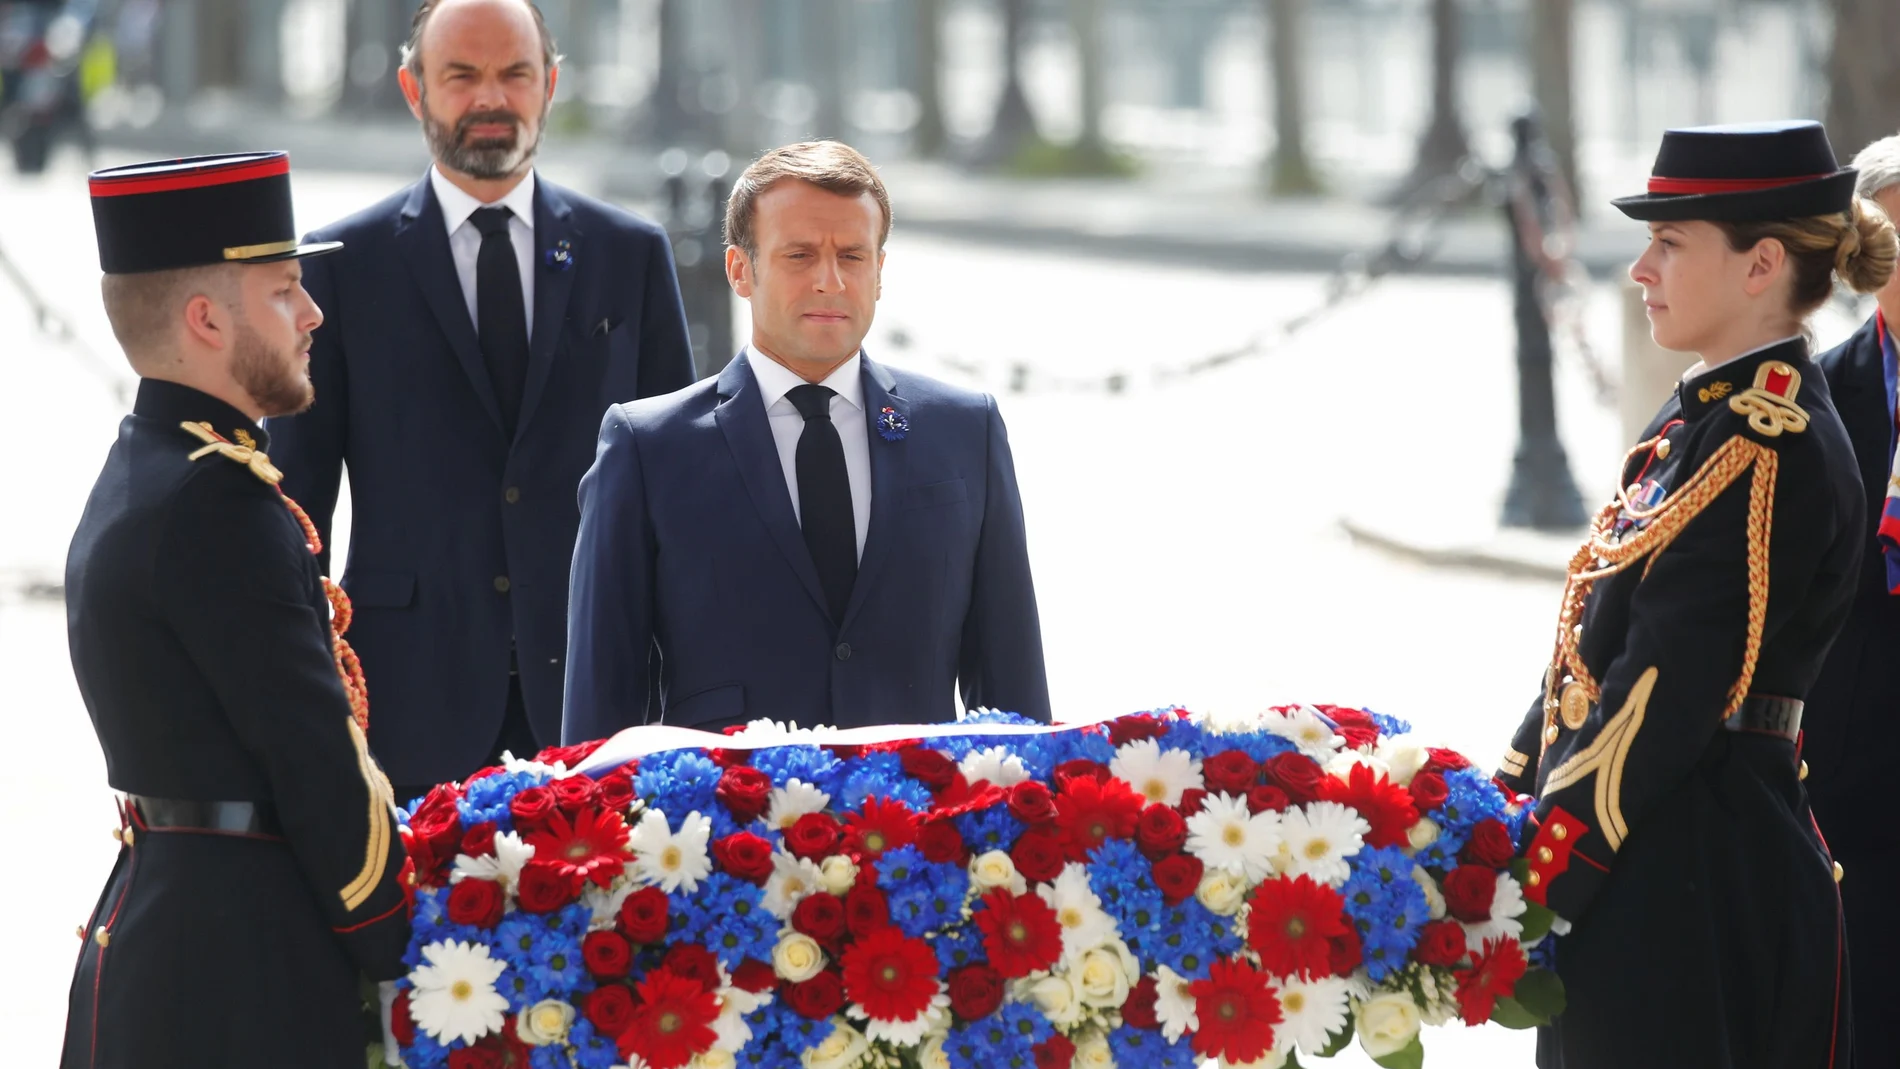 French President Emmanuel Macron attends a ceremony to mark the end of World War II at the Arc de Triomphe in Paris